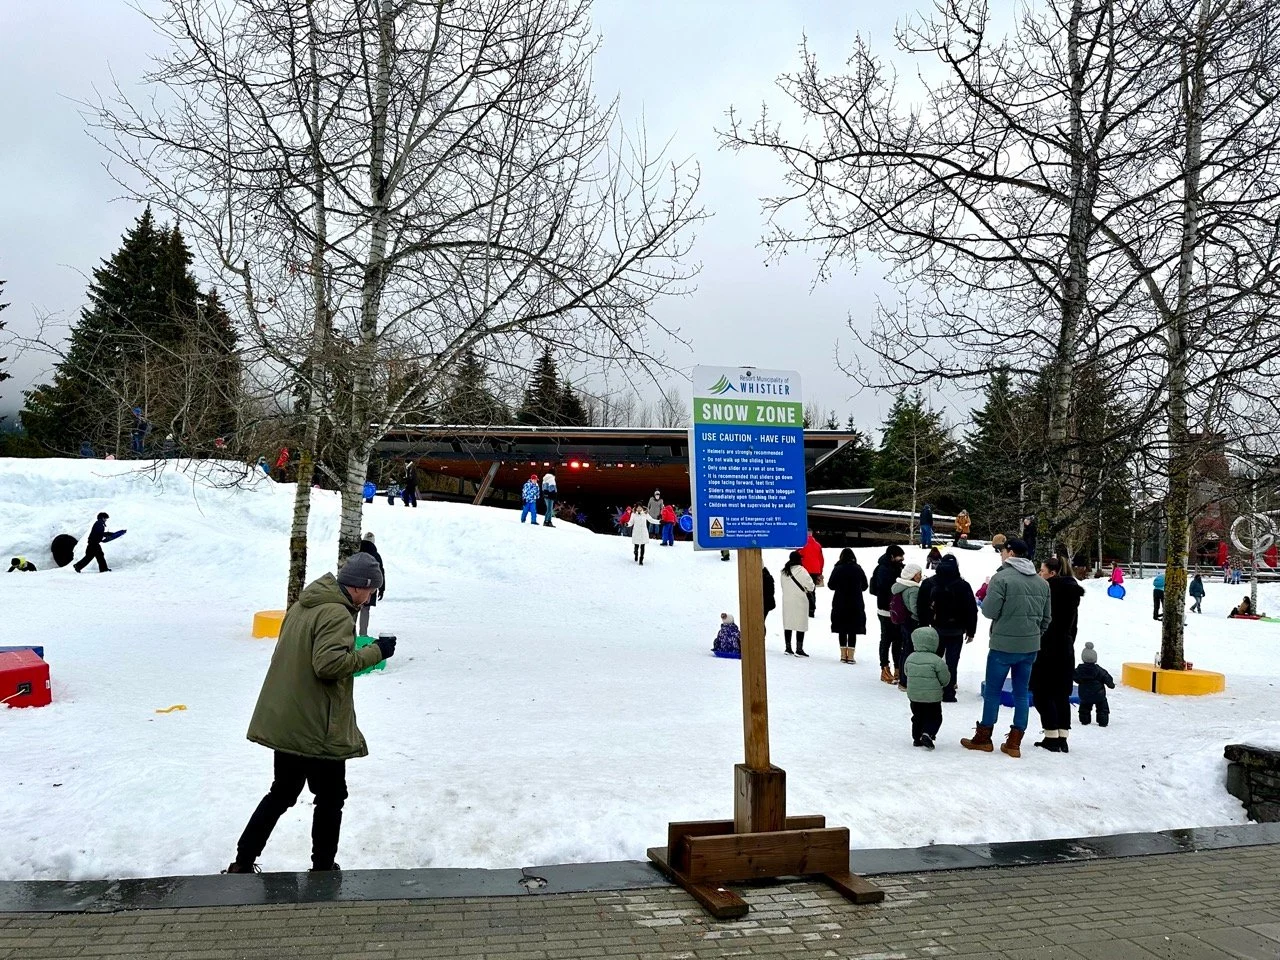 People play in the snow at the Whistler Village Snow play zone